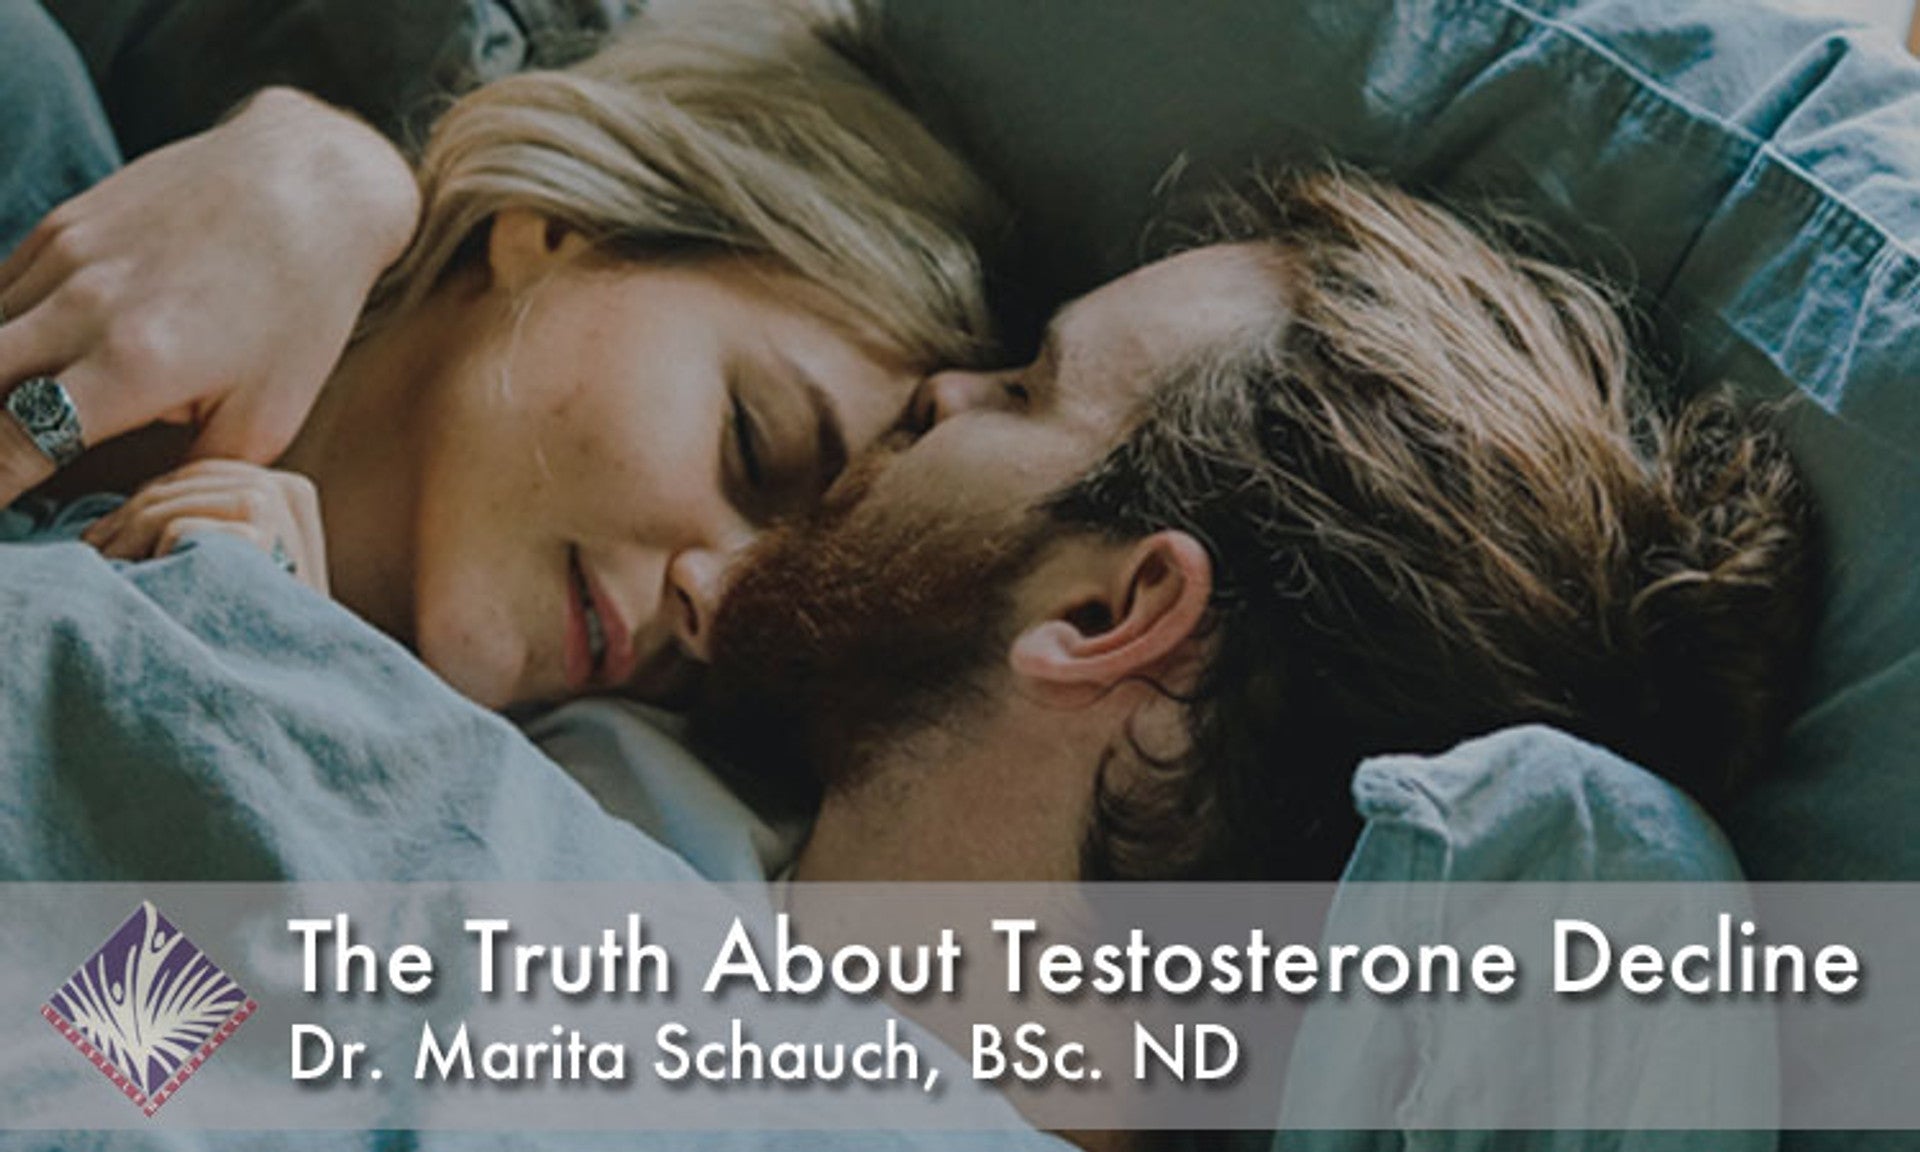 The Truth About Testosterone Decline